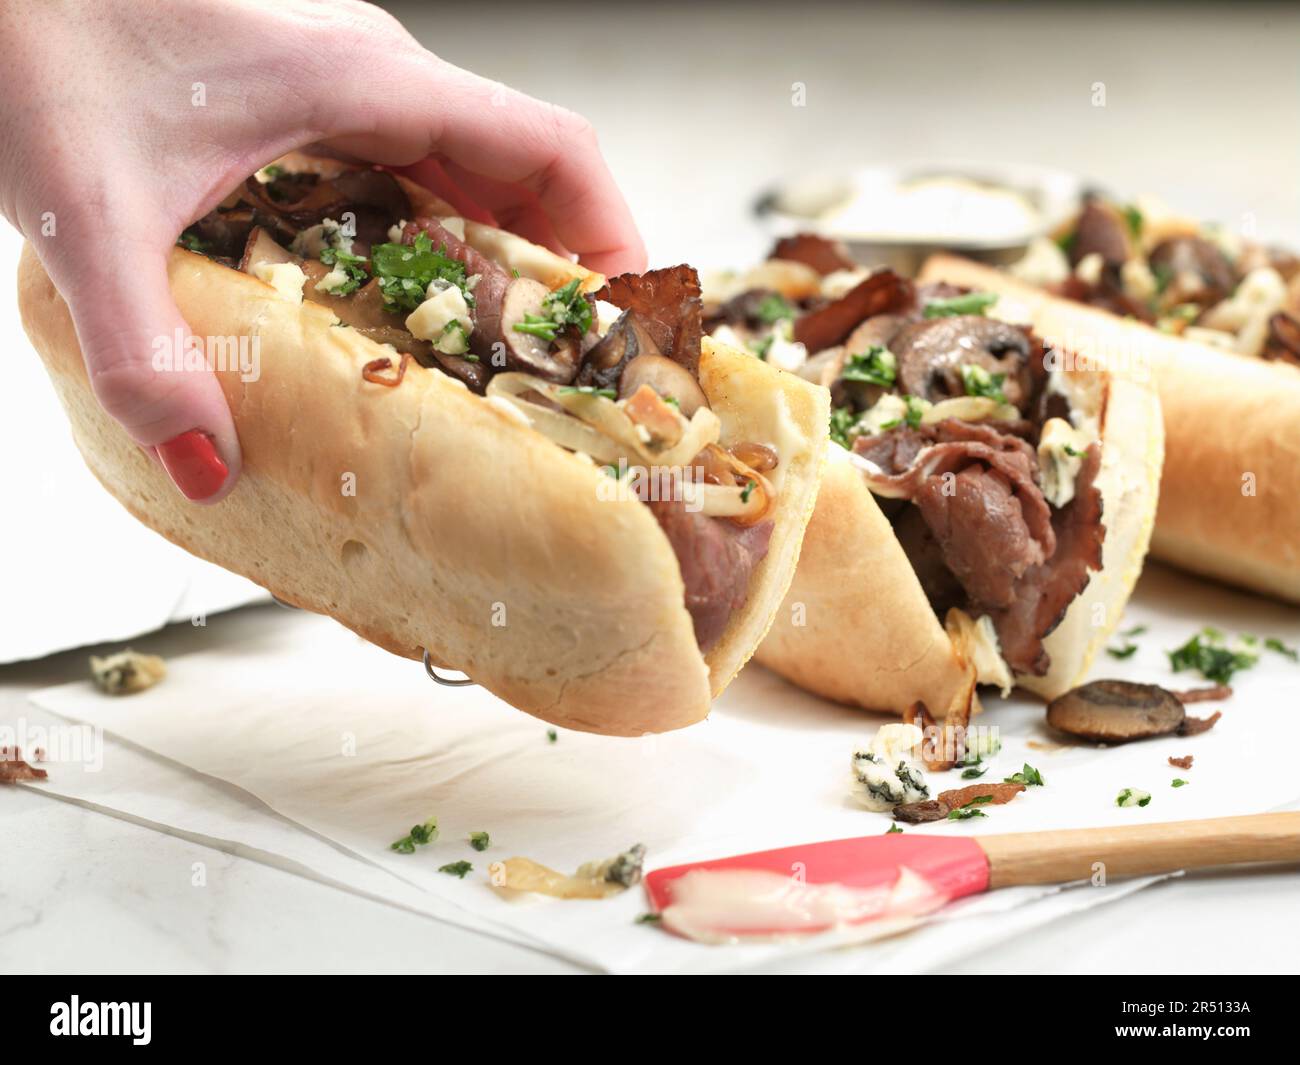 Sandwiches with mushroom, onion and cheese Stock Photo